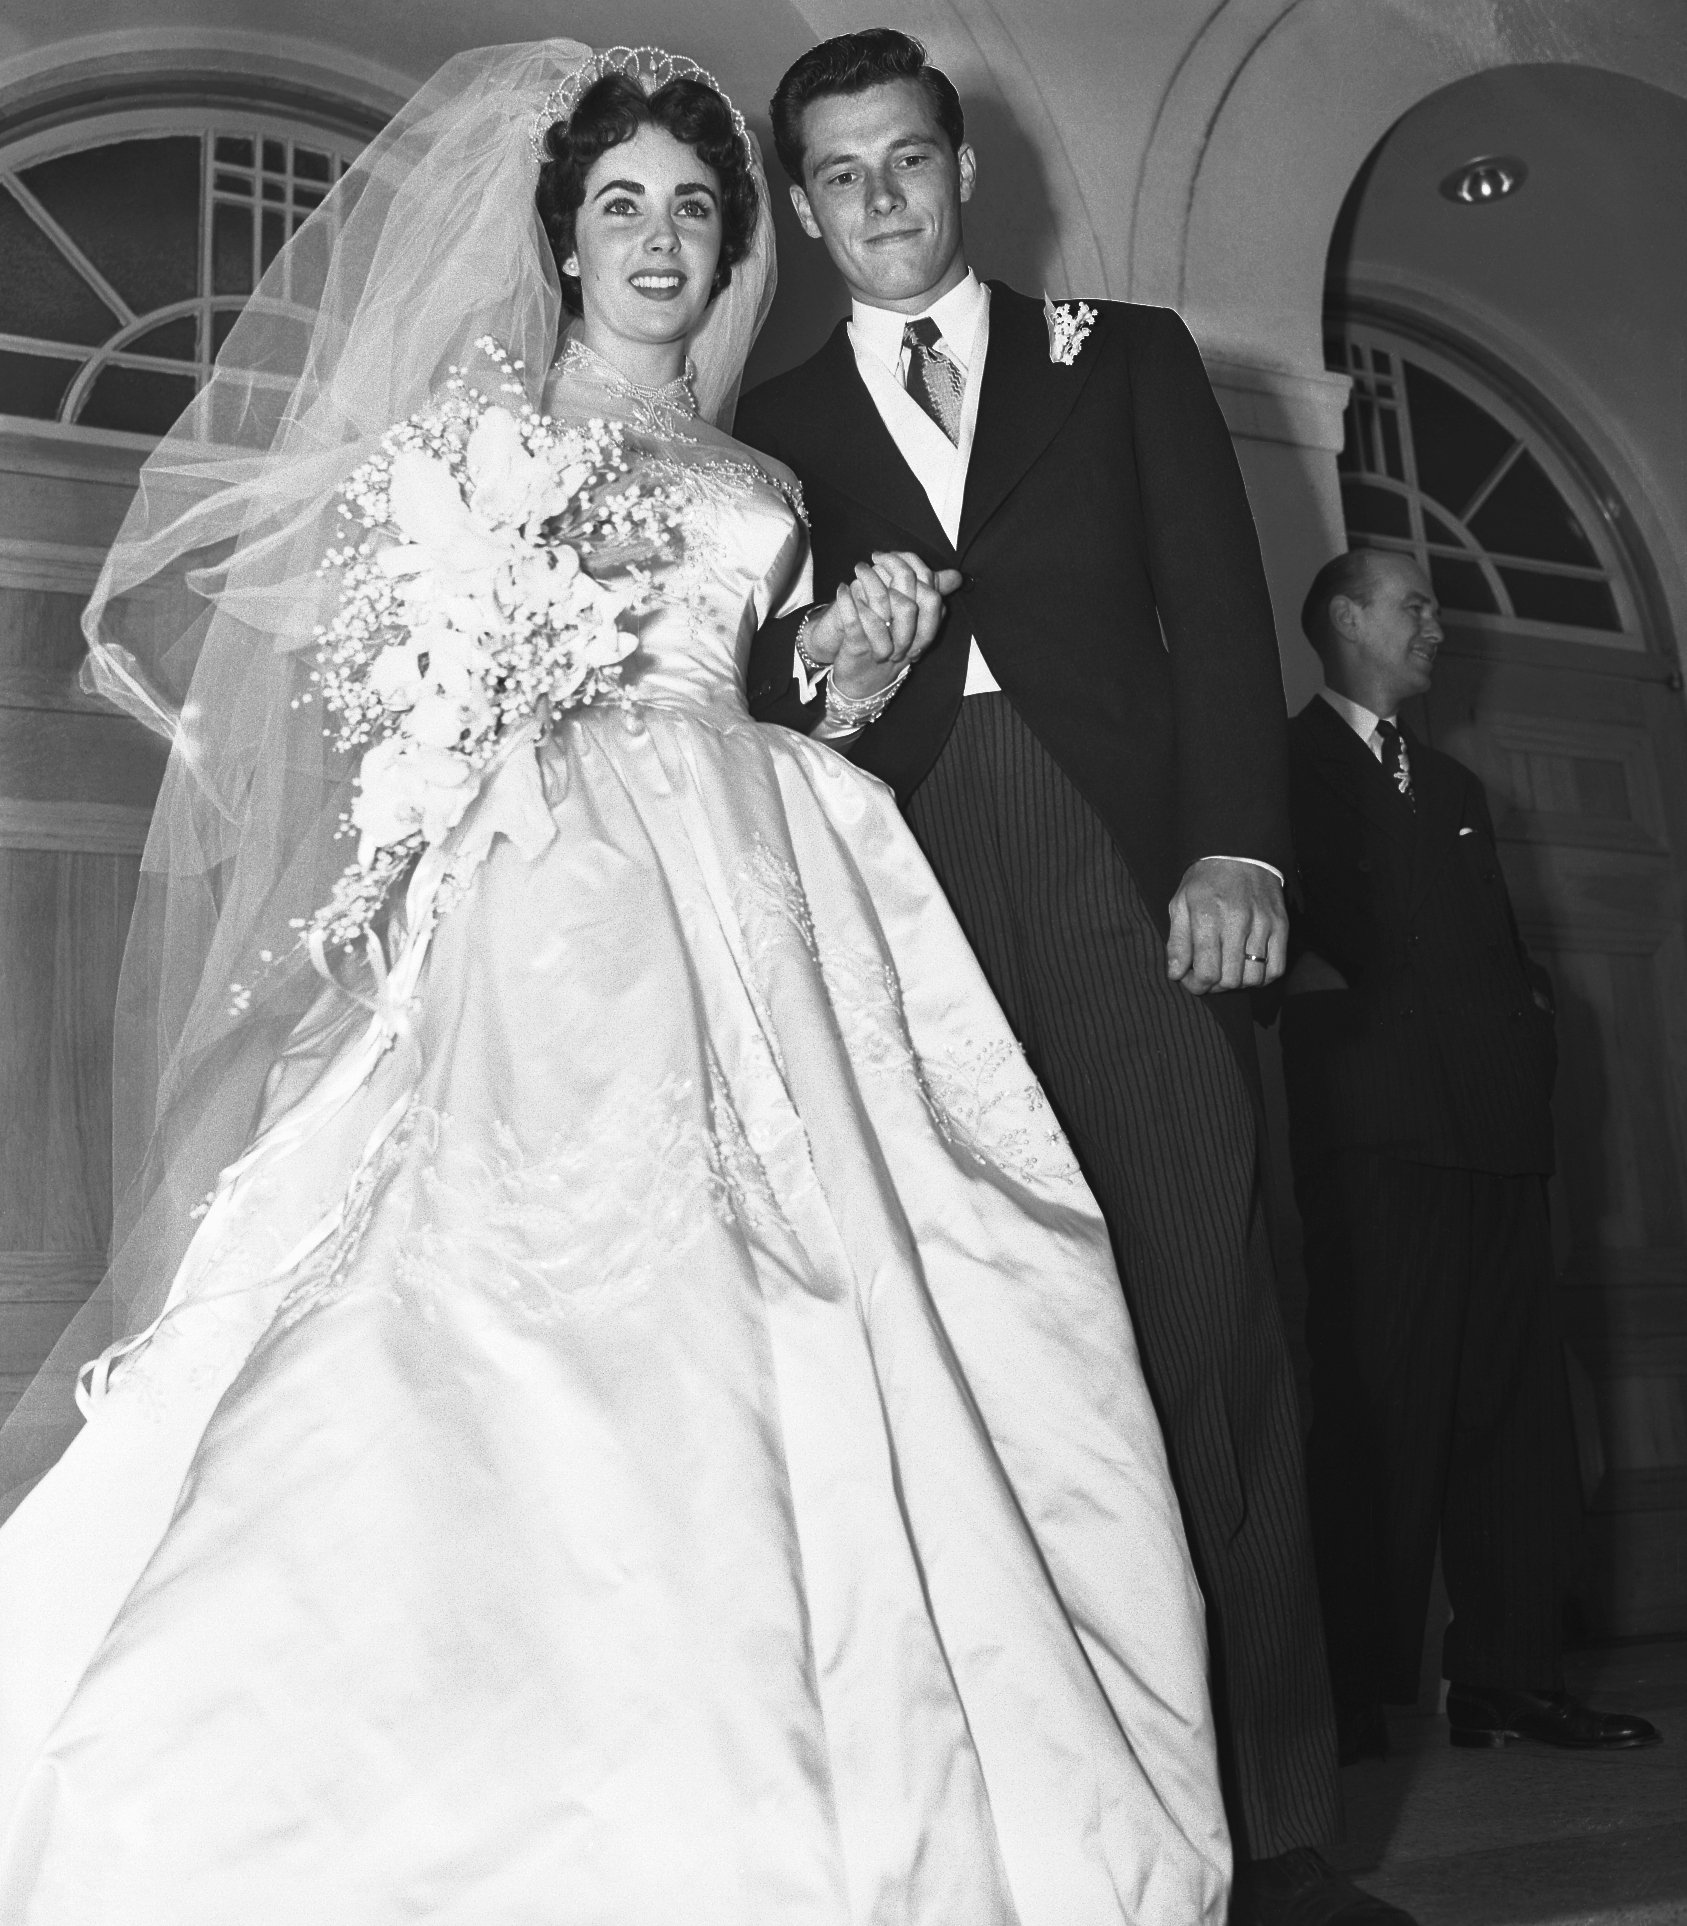 Newlyweds Elizabeth Taylor and Conrad Hilton Jr., pictured at the Church of the Good Shepherd after their nuptials in 1950. / Source: Getty Images